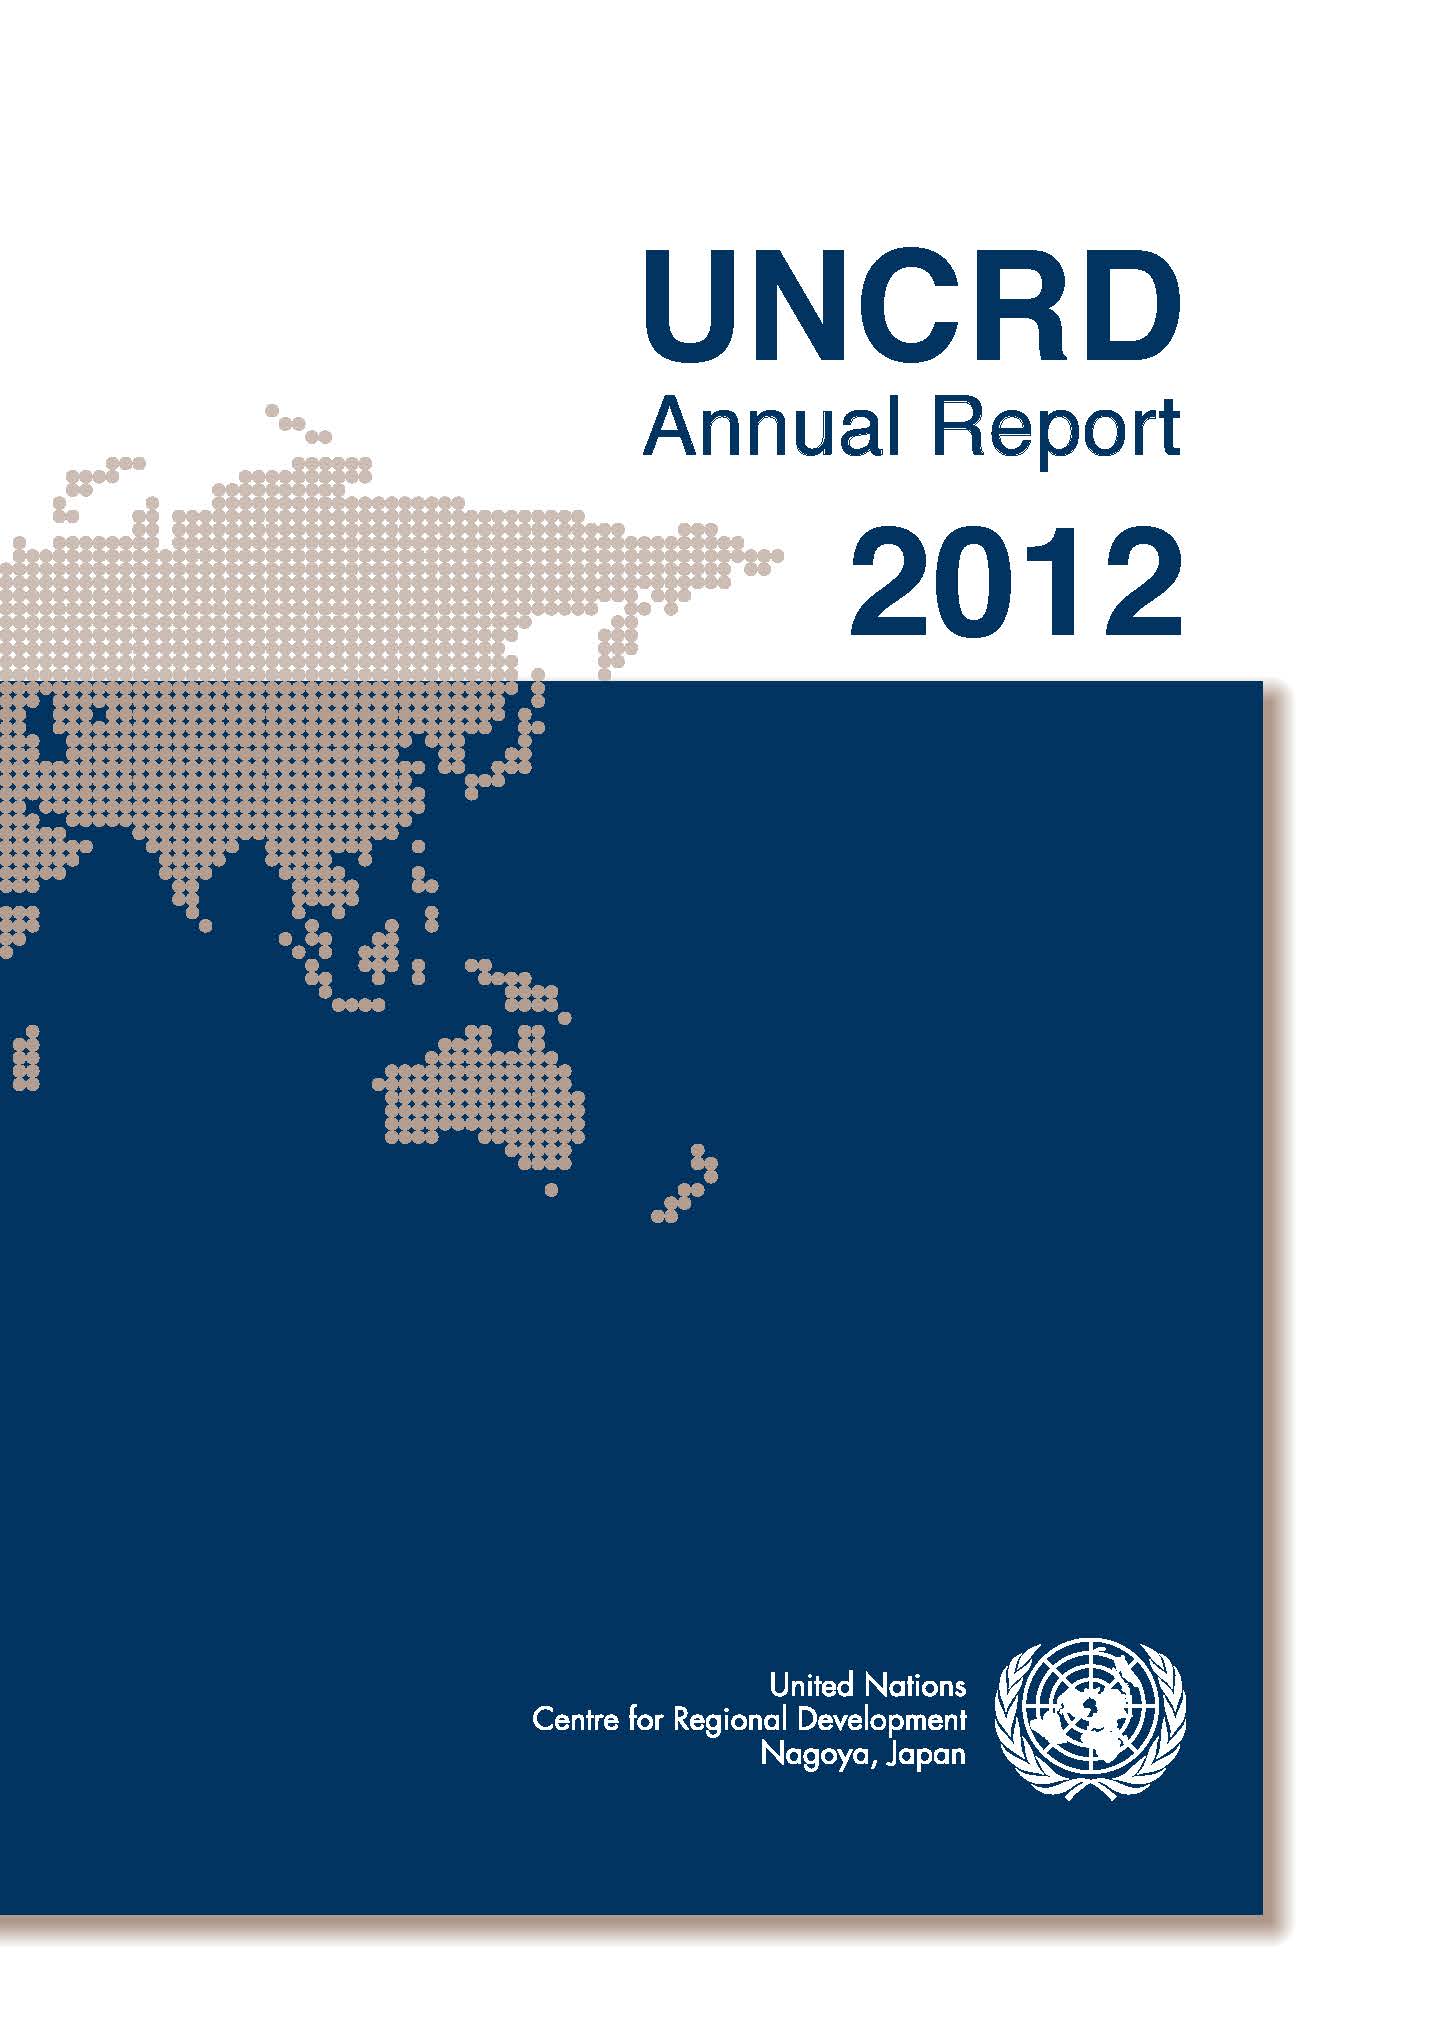 Cover of the UNCRD Annual Report 2012